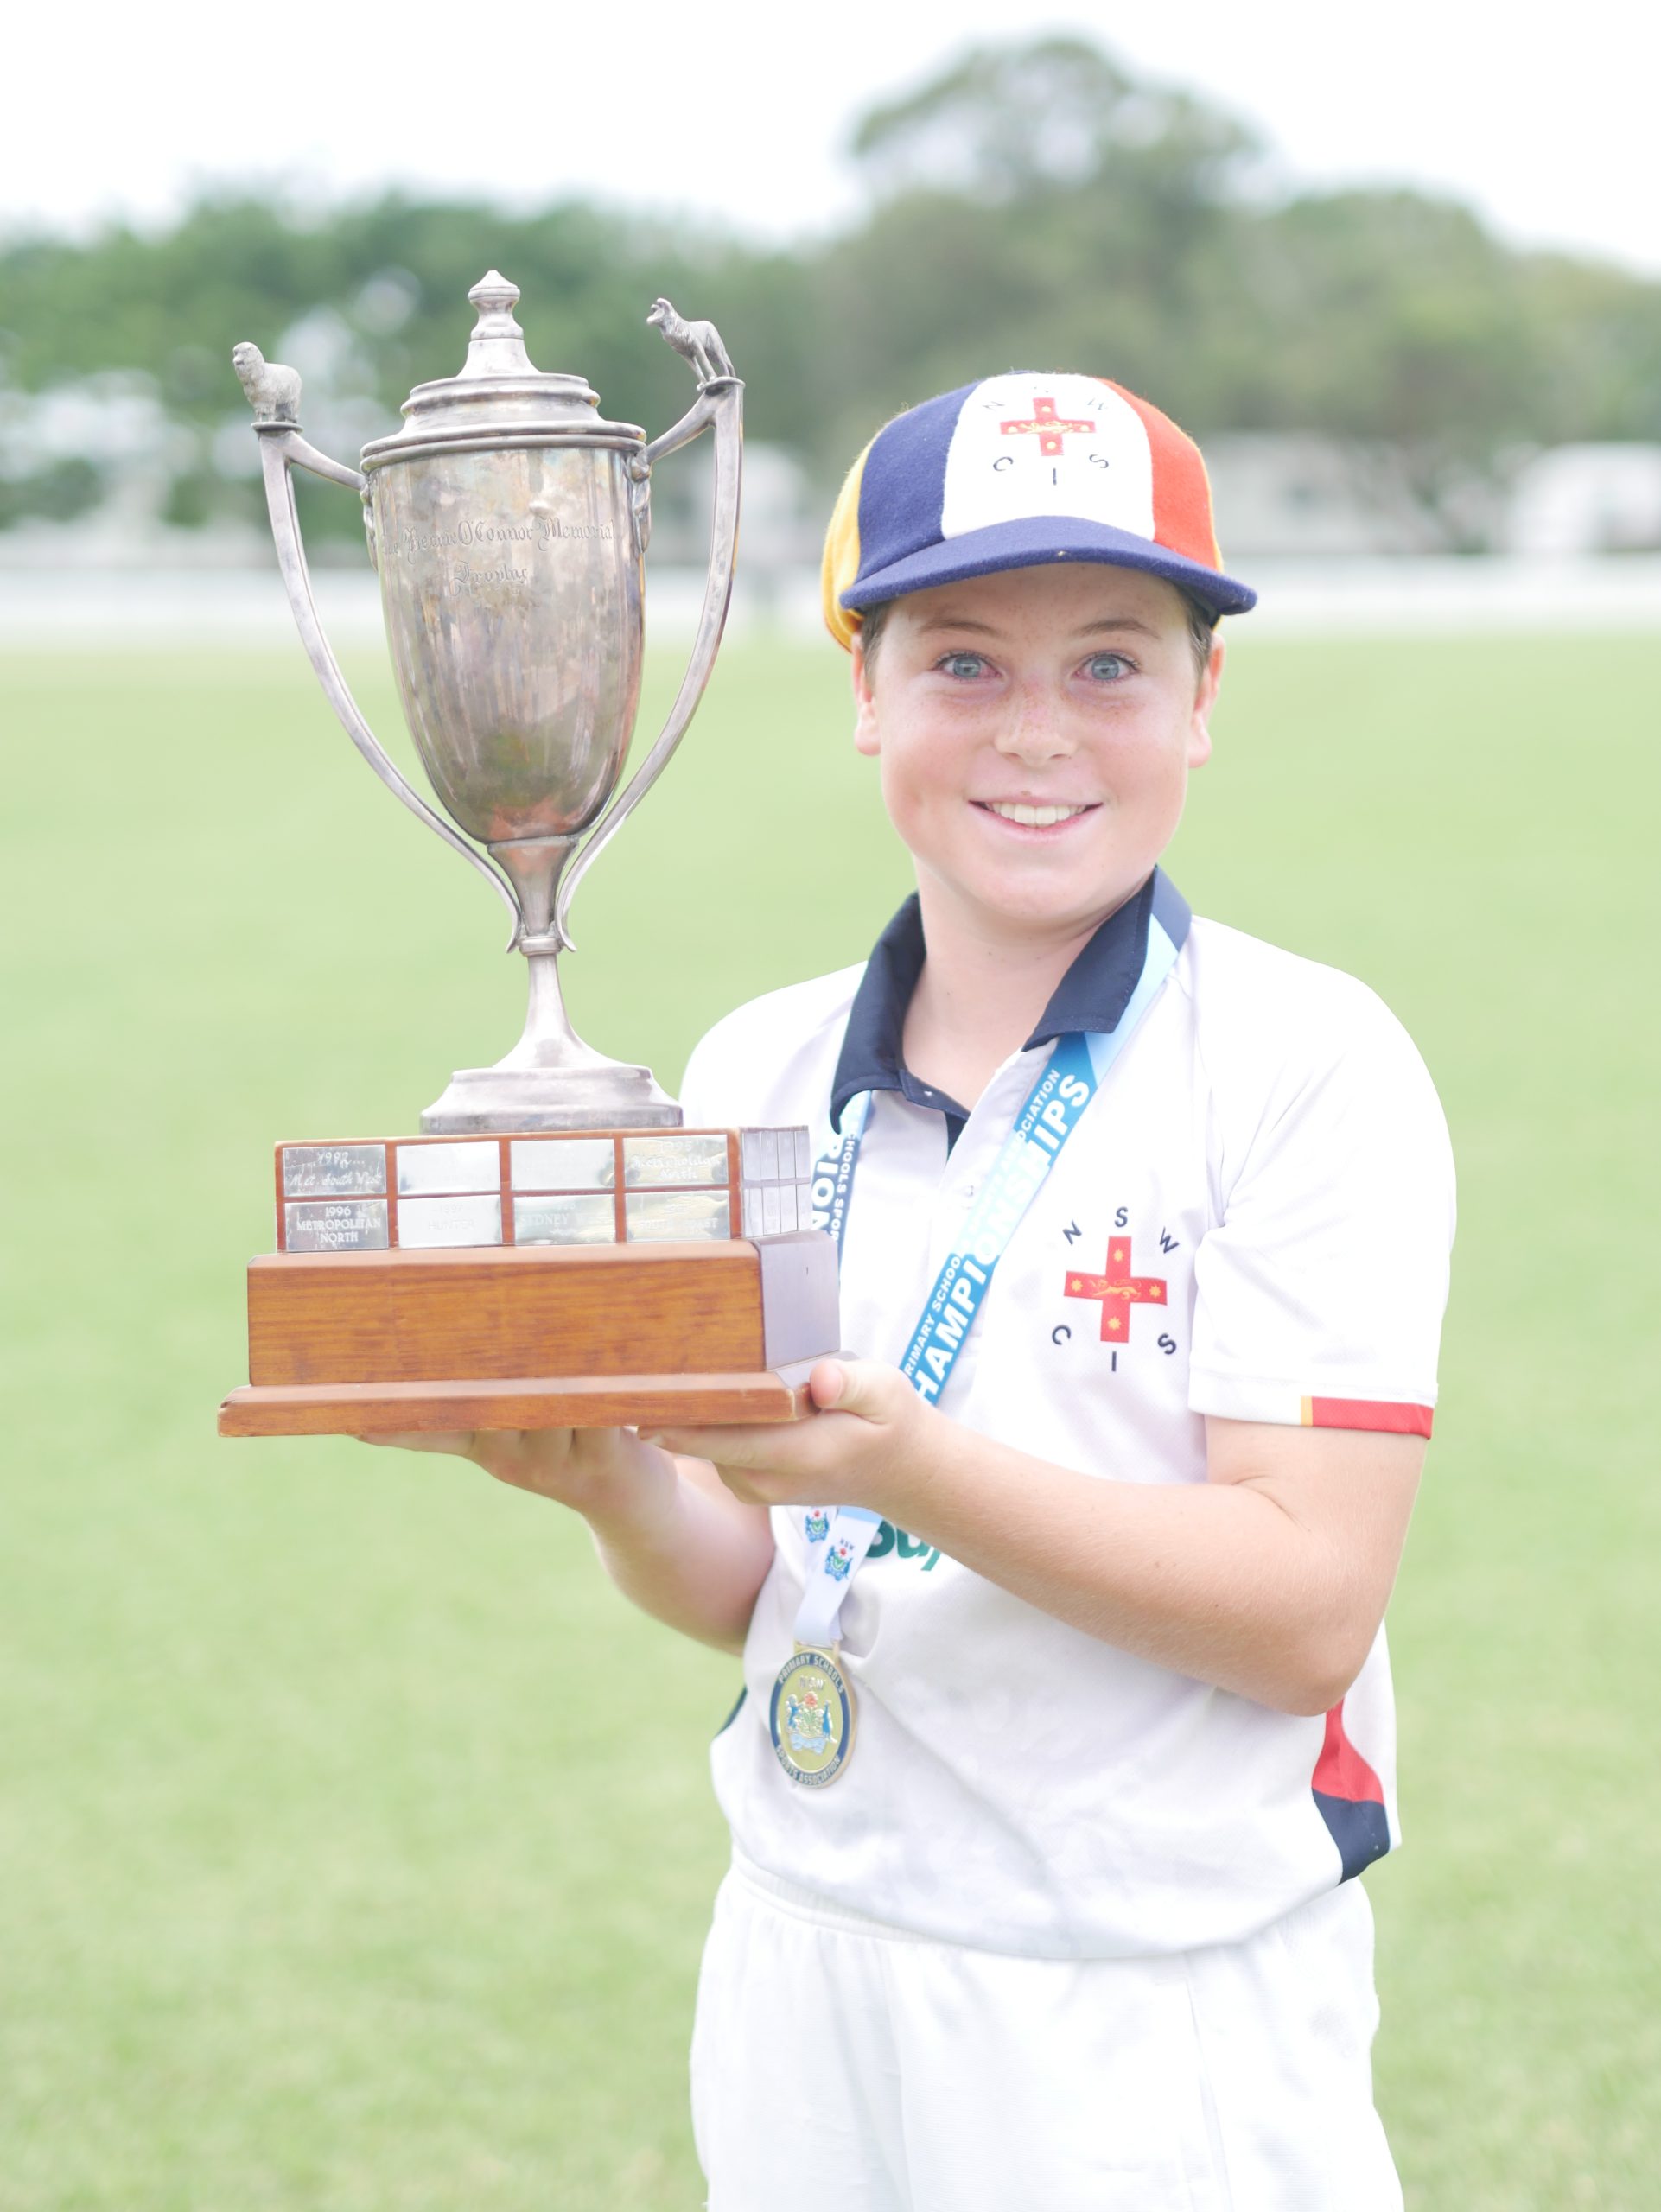 Tom Hunt - NSWCIS Primary Boys Cricket with Trophy